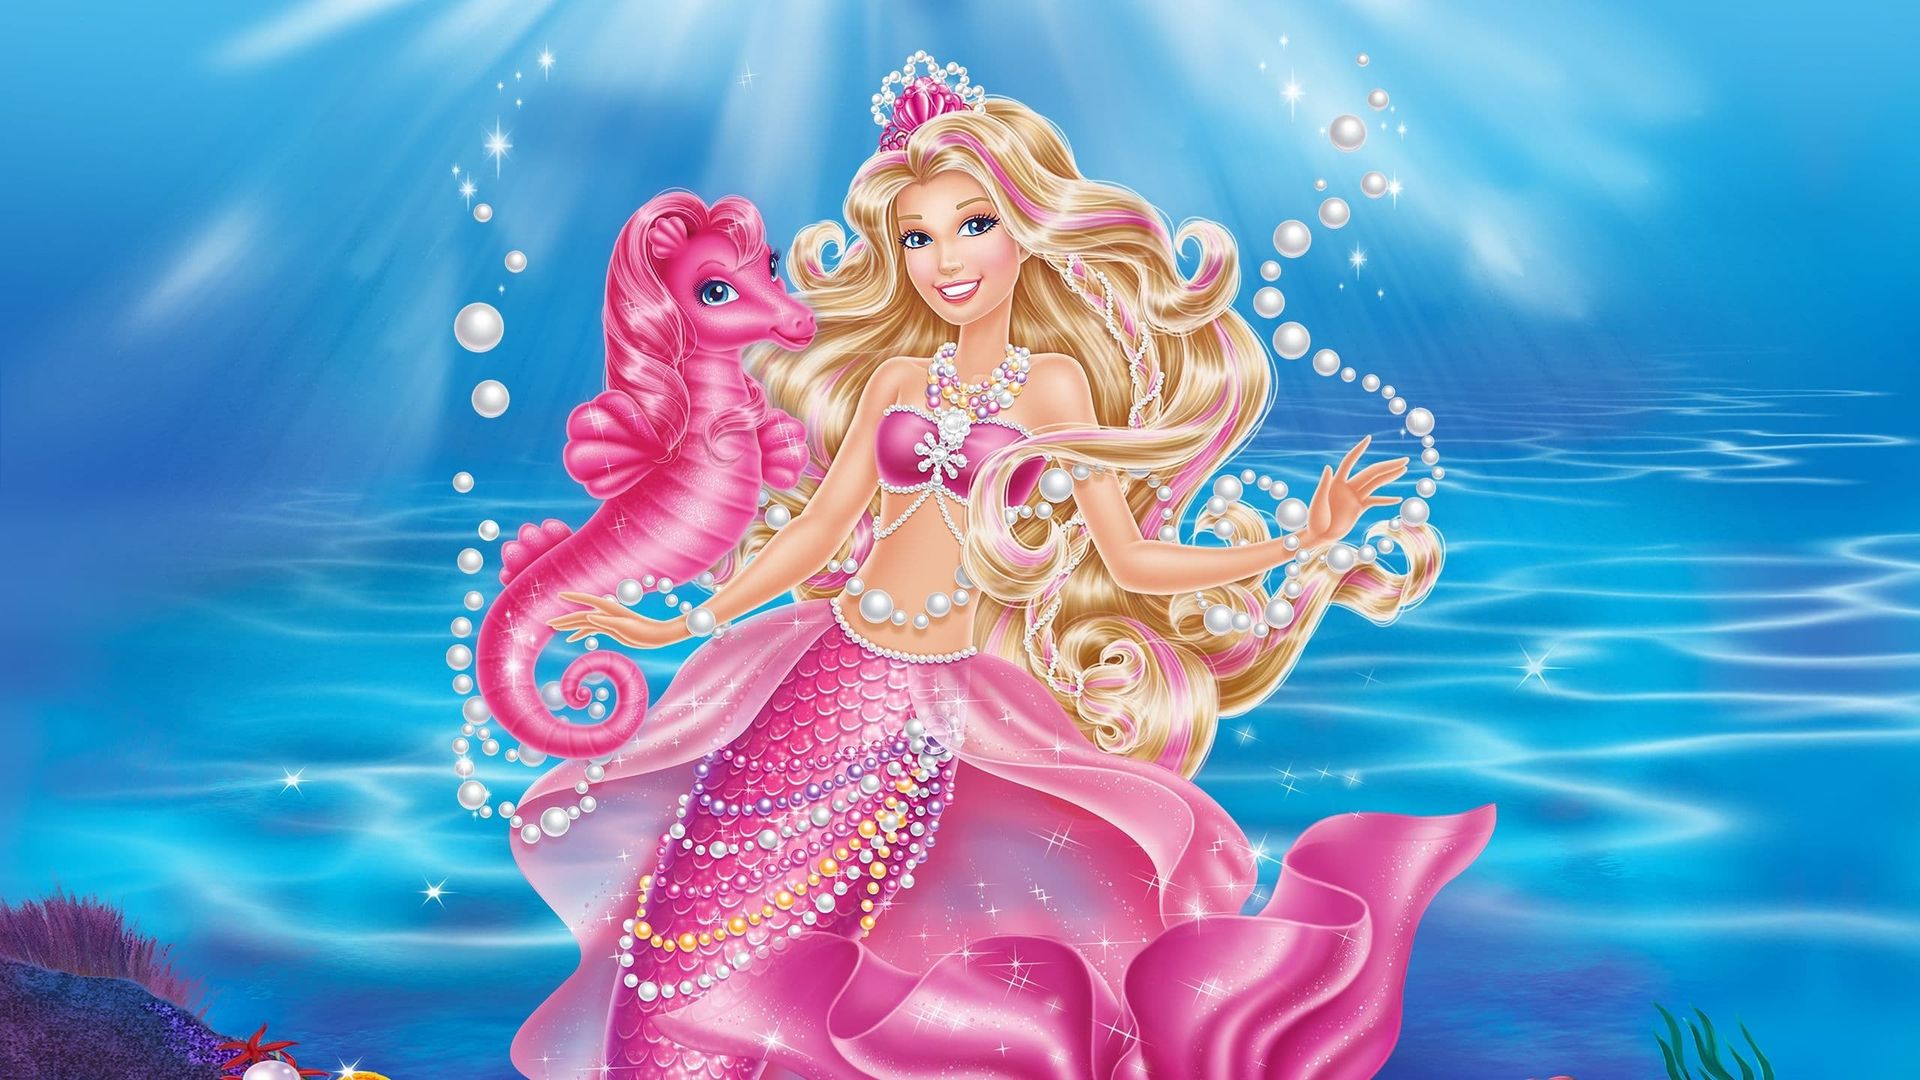 Barbie: The Pearl Princess background